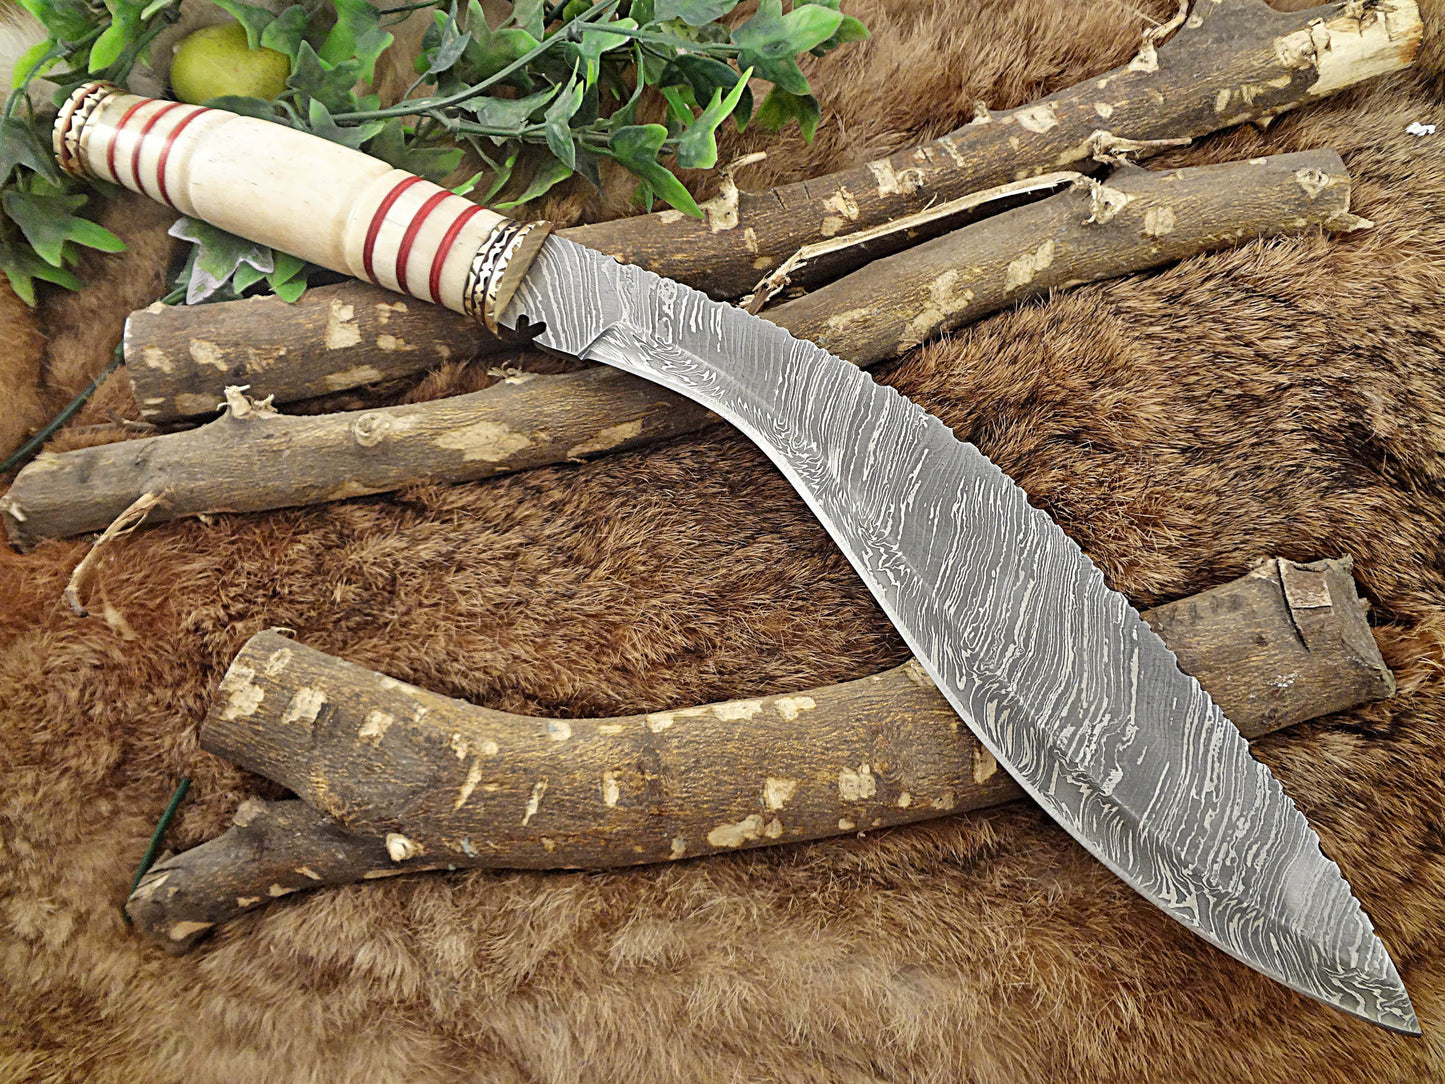 15" custom made Hand Forged Damascus Steel Kukri Knife With 10" blade, camel bone with engraved brass finger guard scale, Leather Sheath